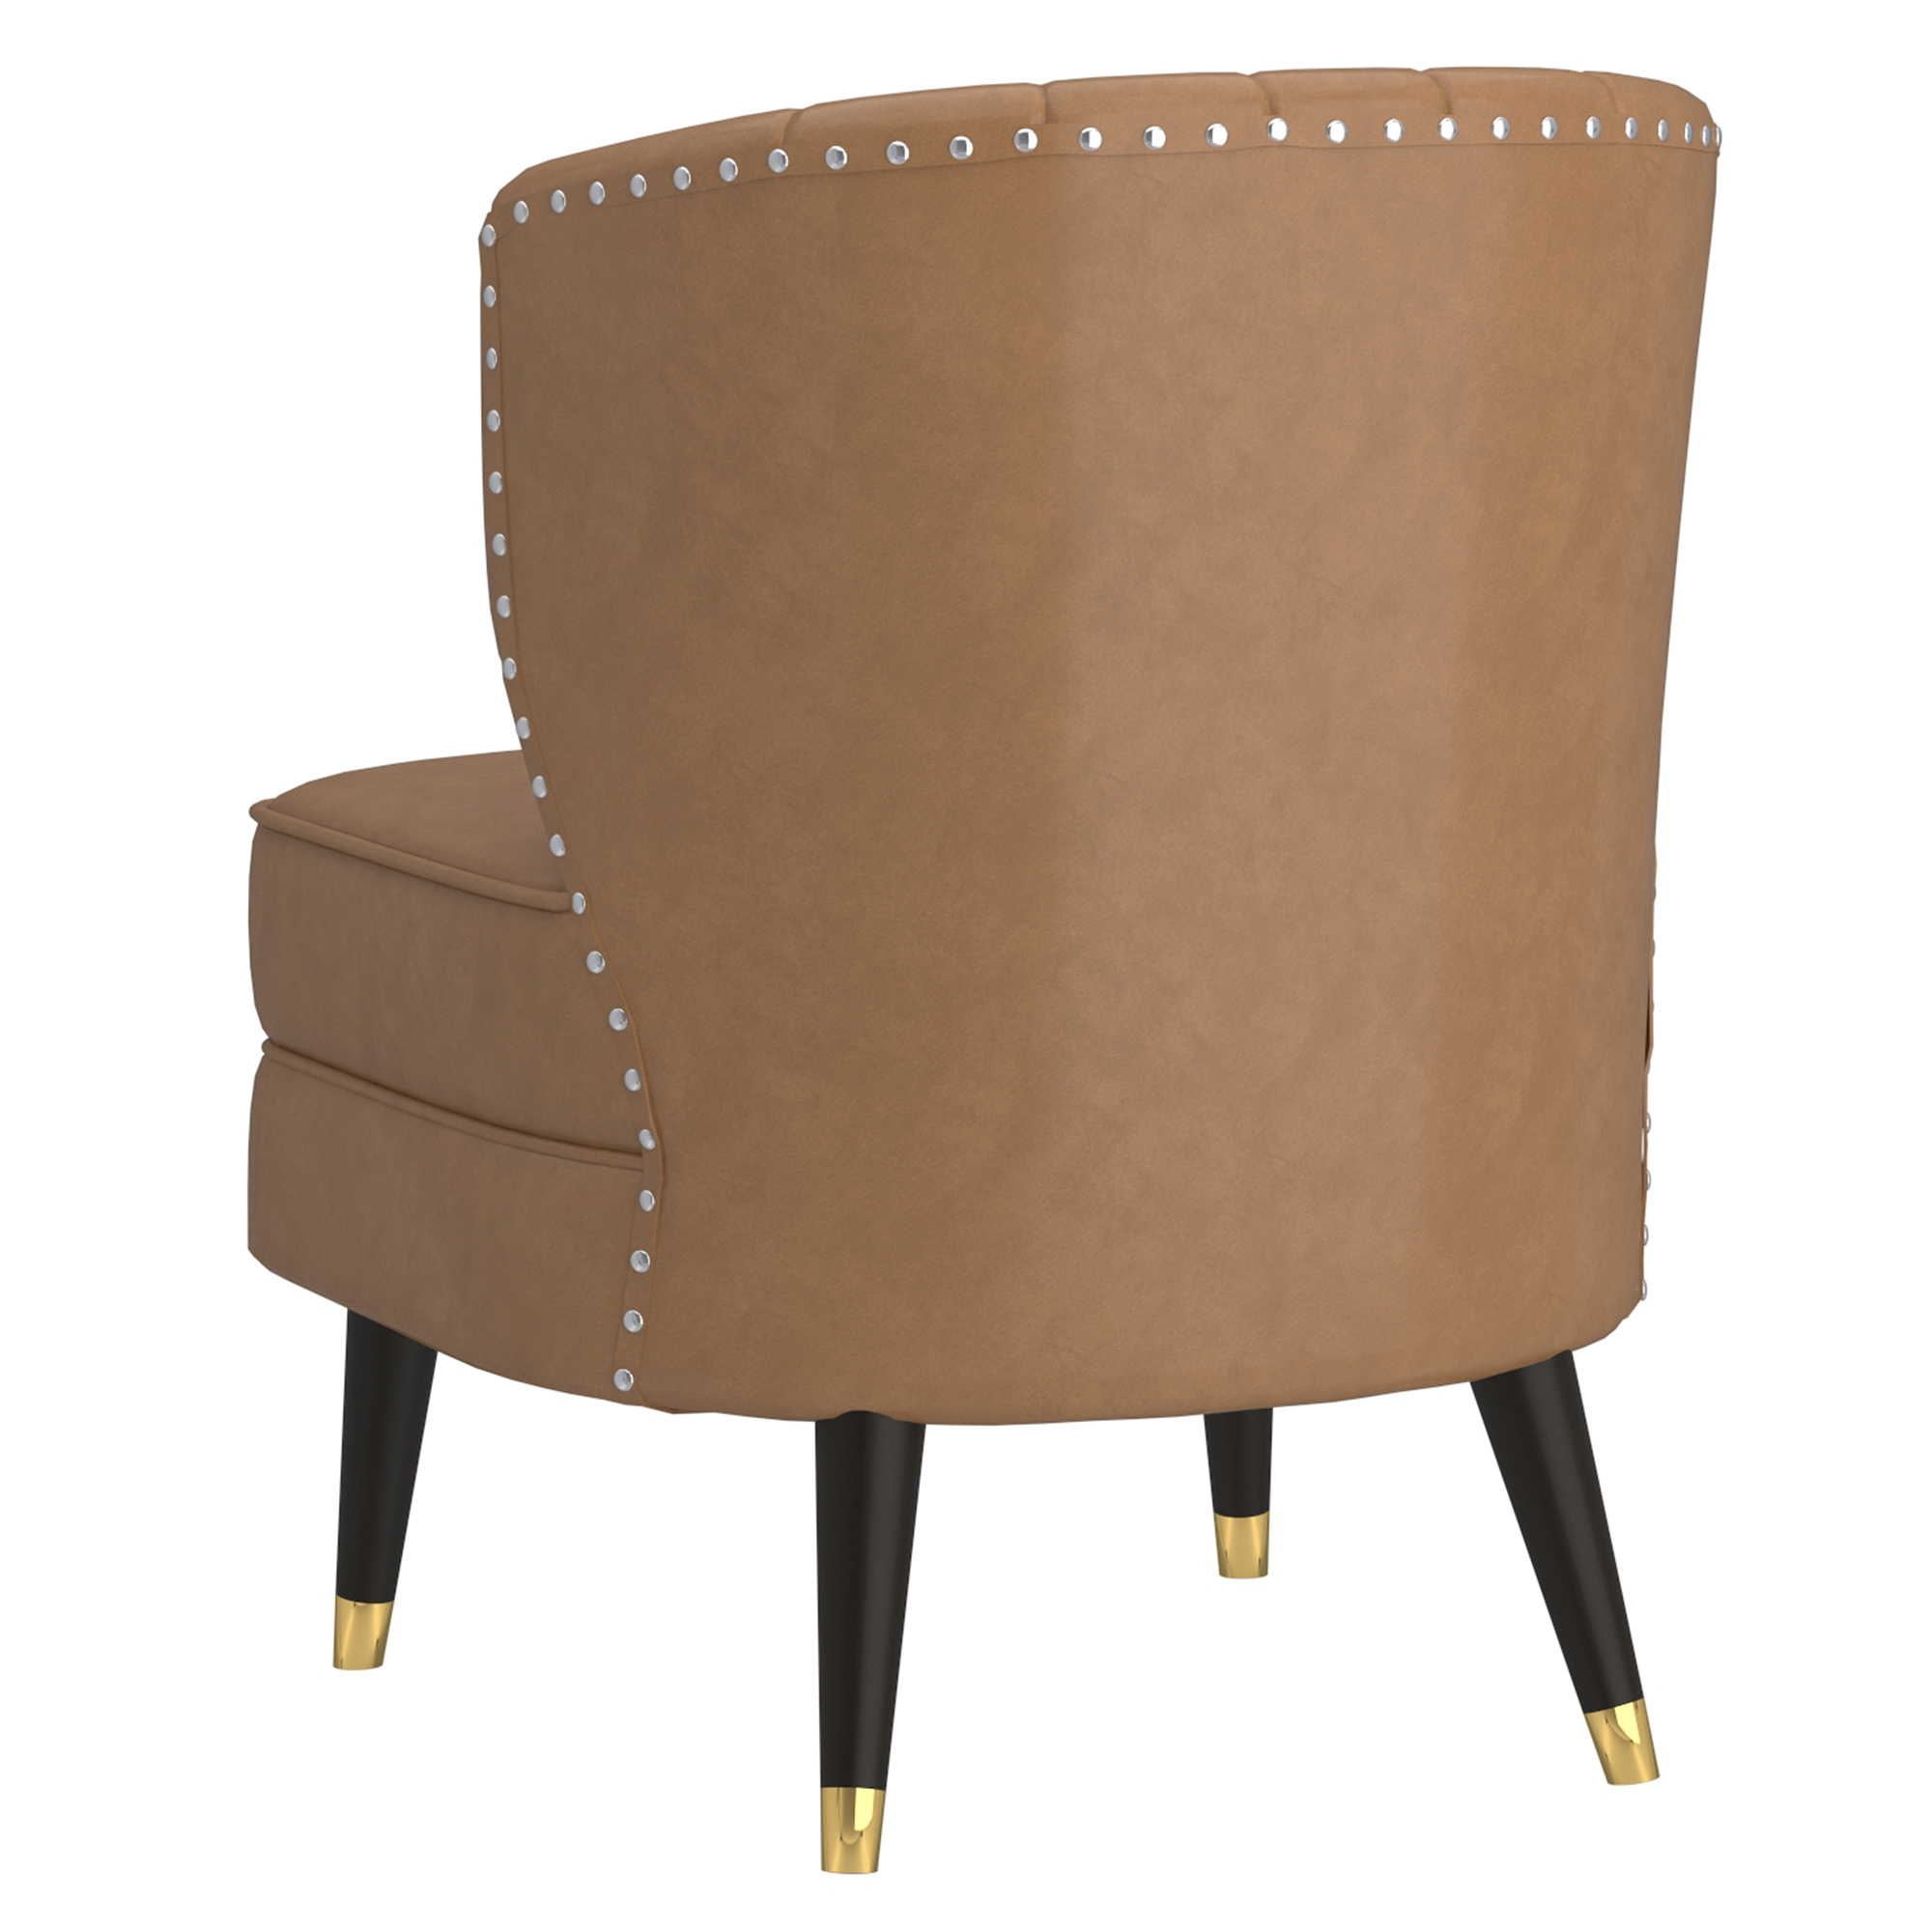 Kyrie-Accent Chair-Saddle